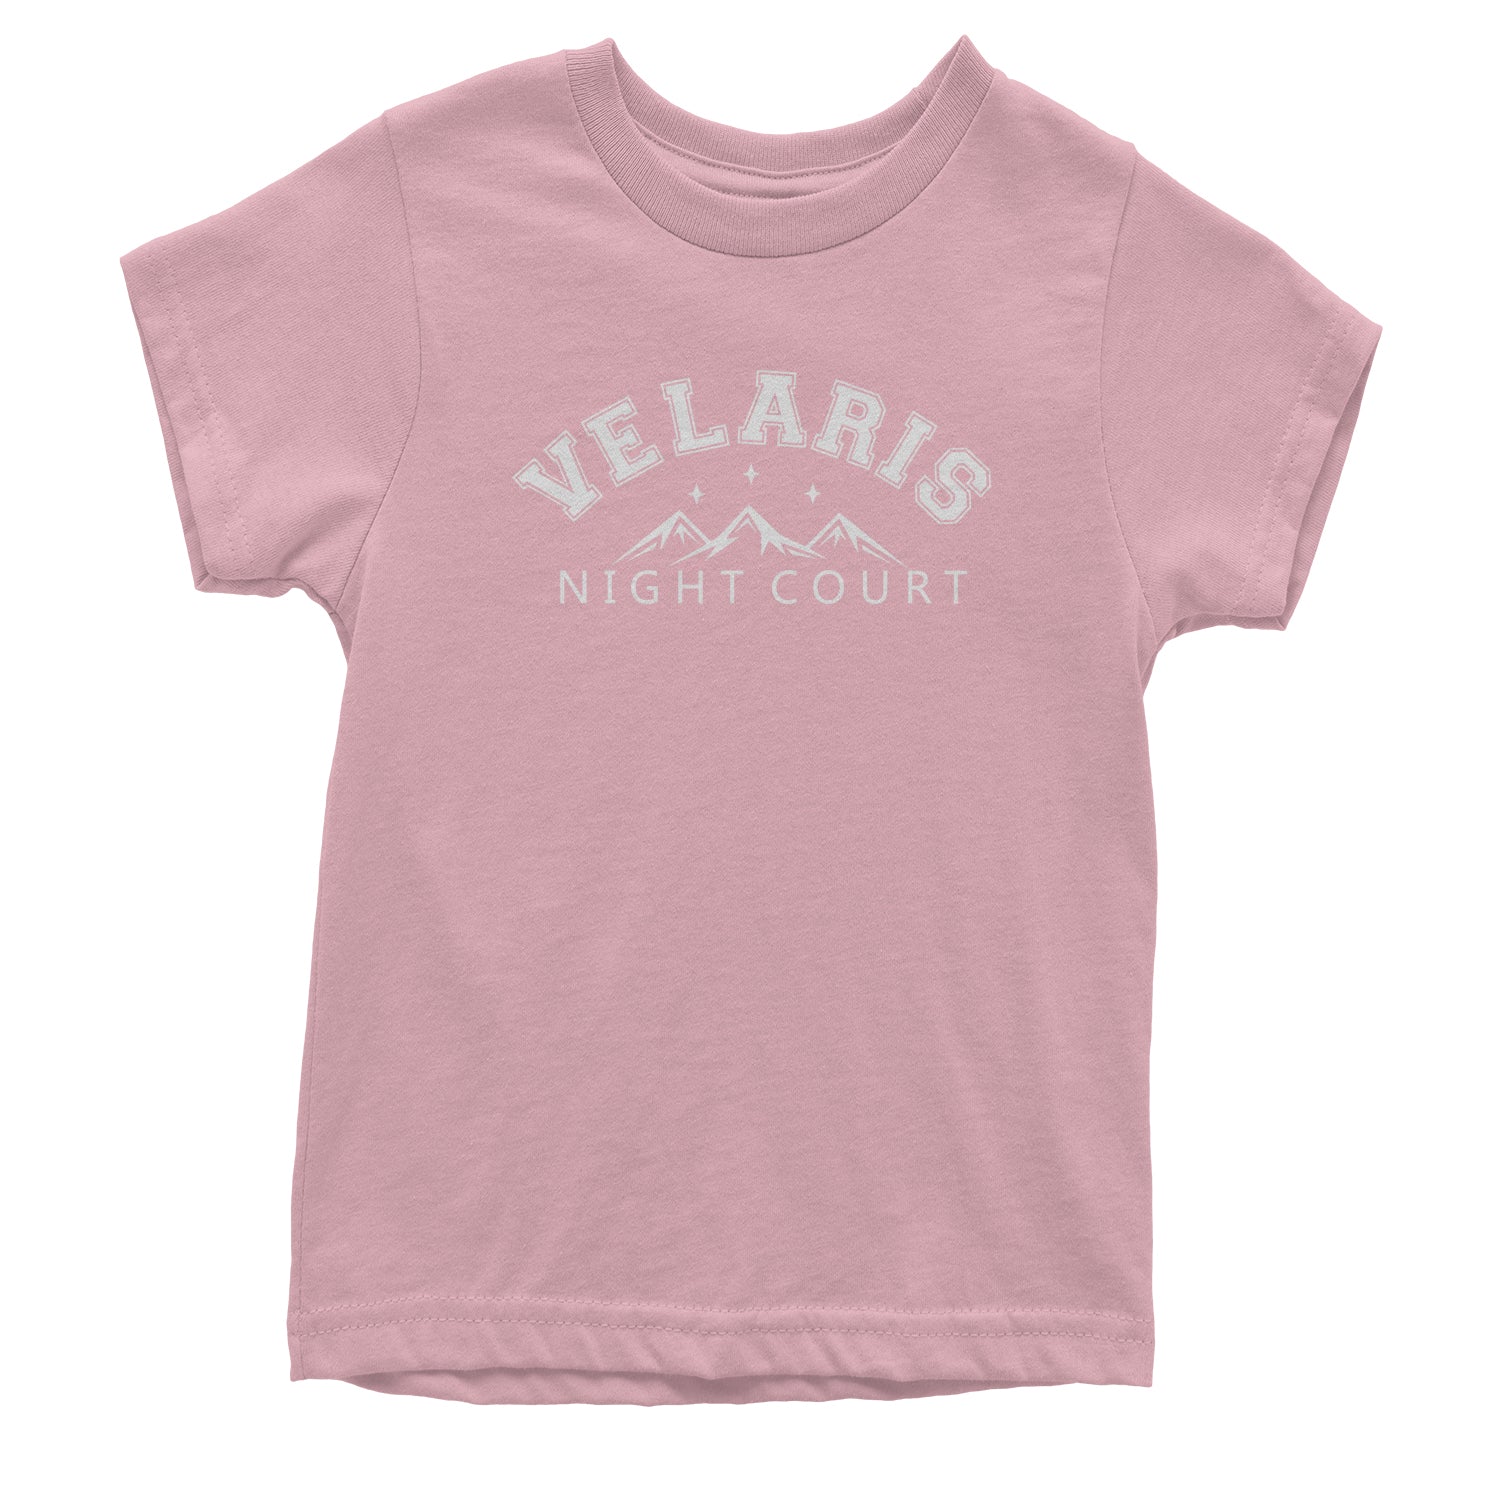 Velaris Night Court Squad Youth T-shirt acotar, court, illyrian, maas, of, thorns by Expression Tees